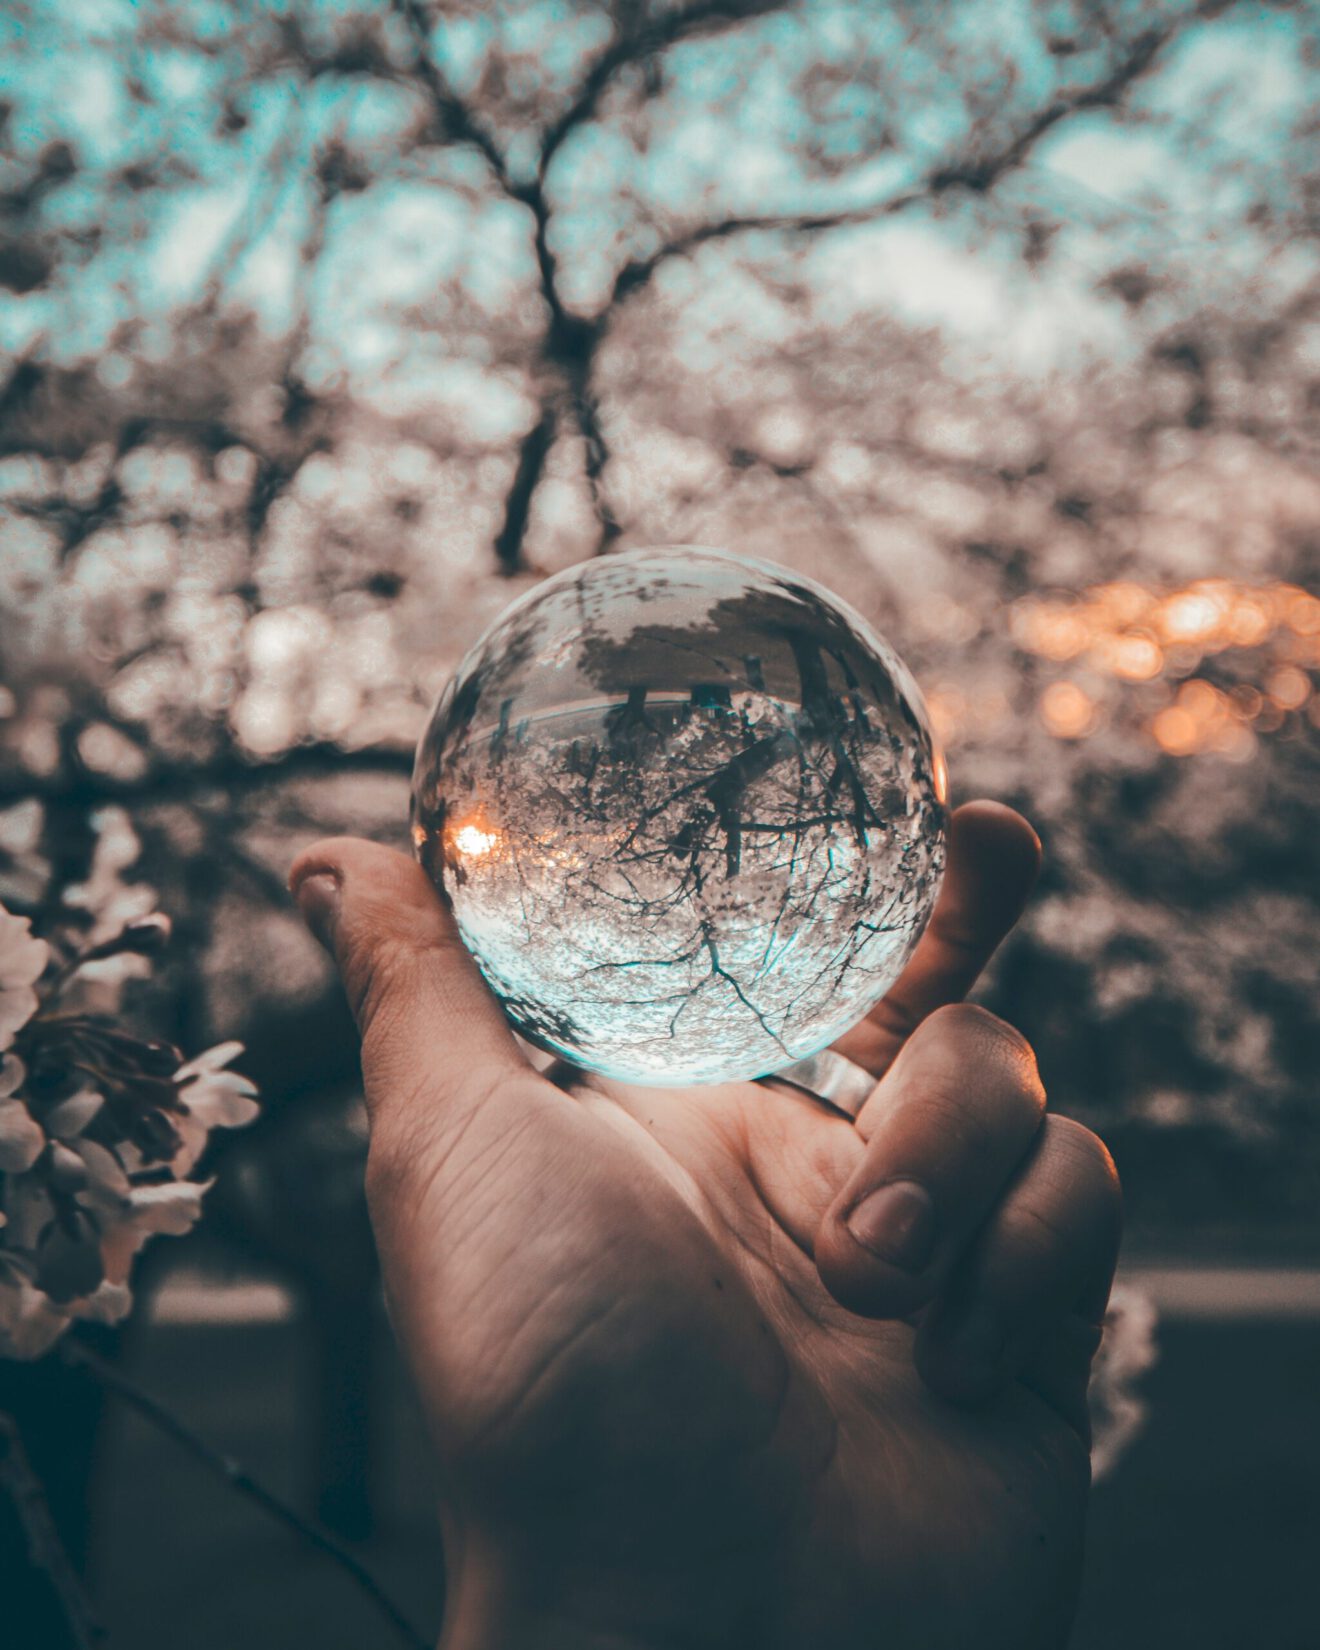 Reflection of flowering trees in glass ball held in man's hand for article on good decisions